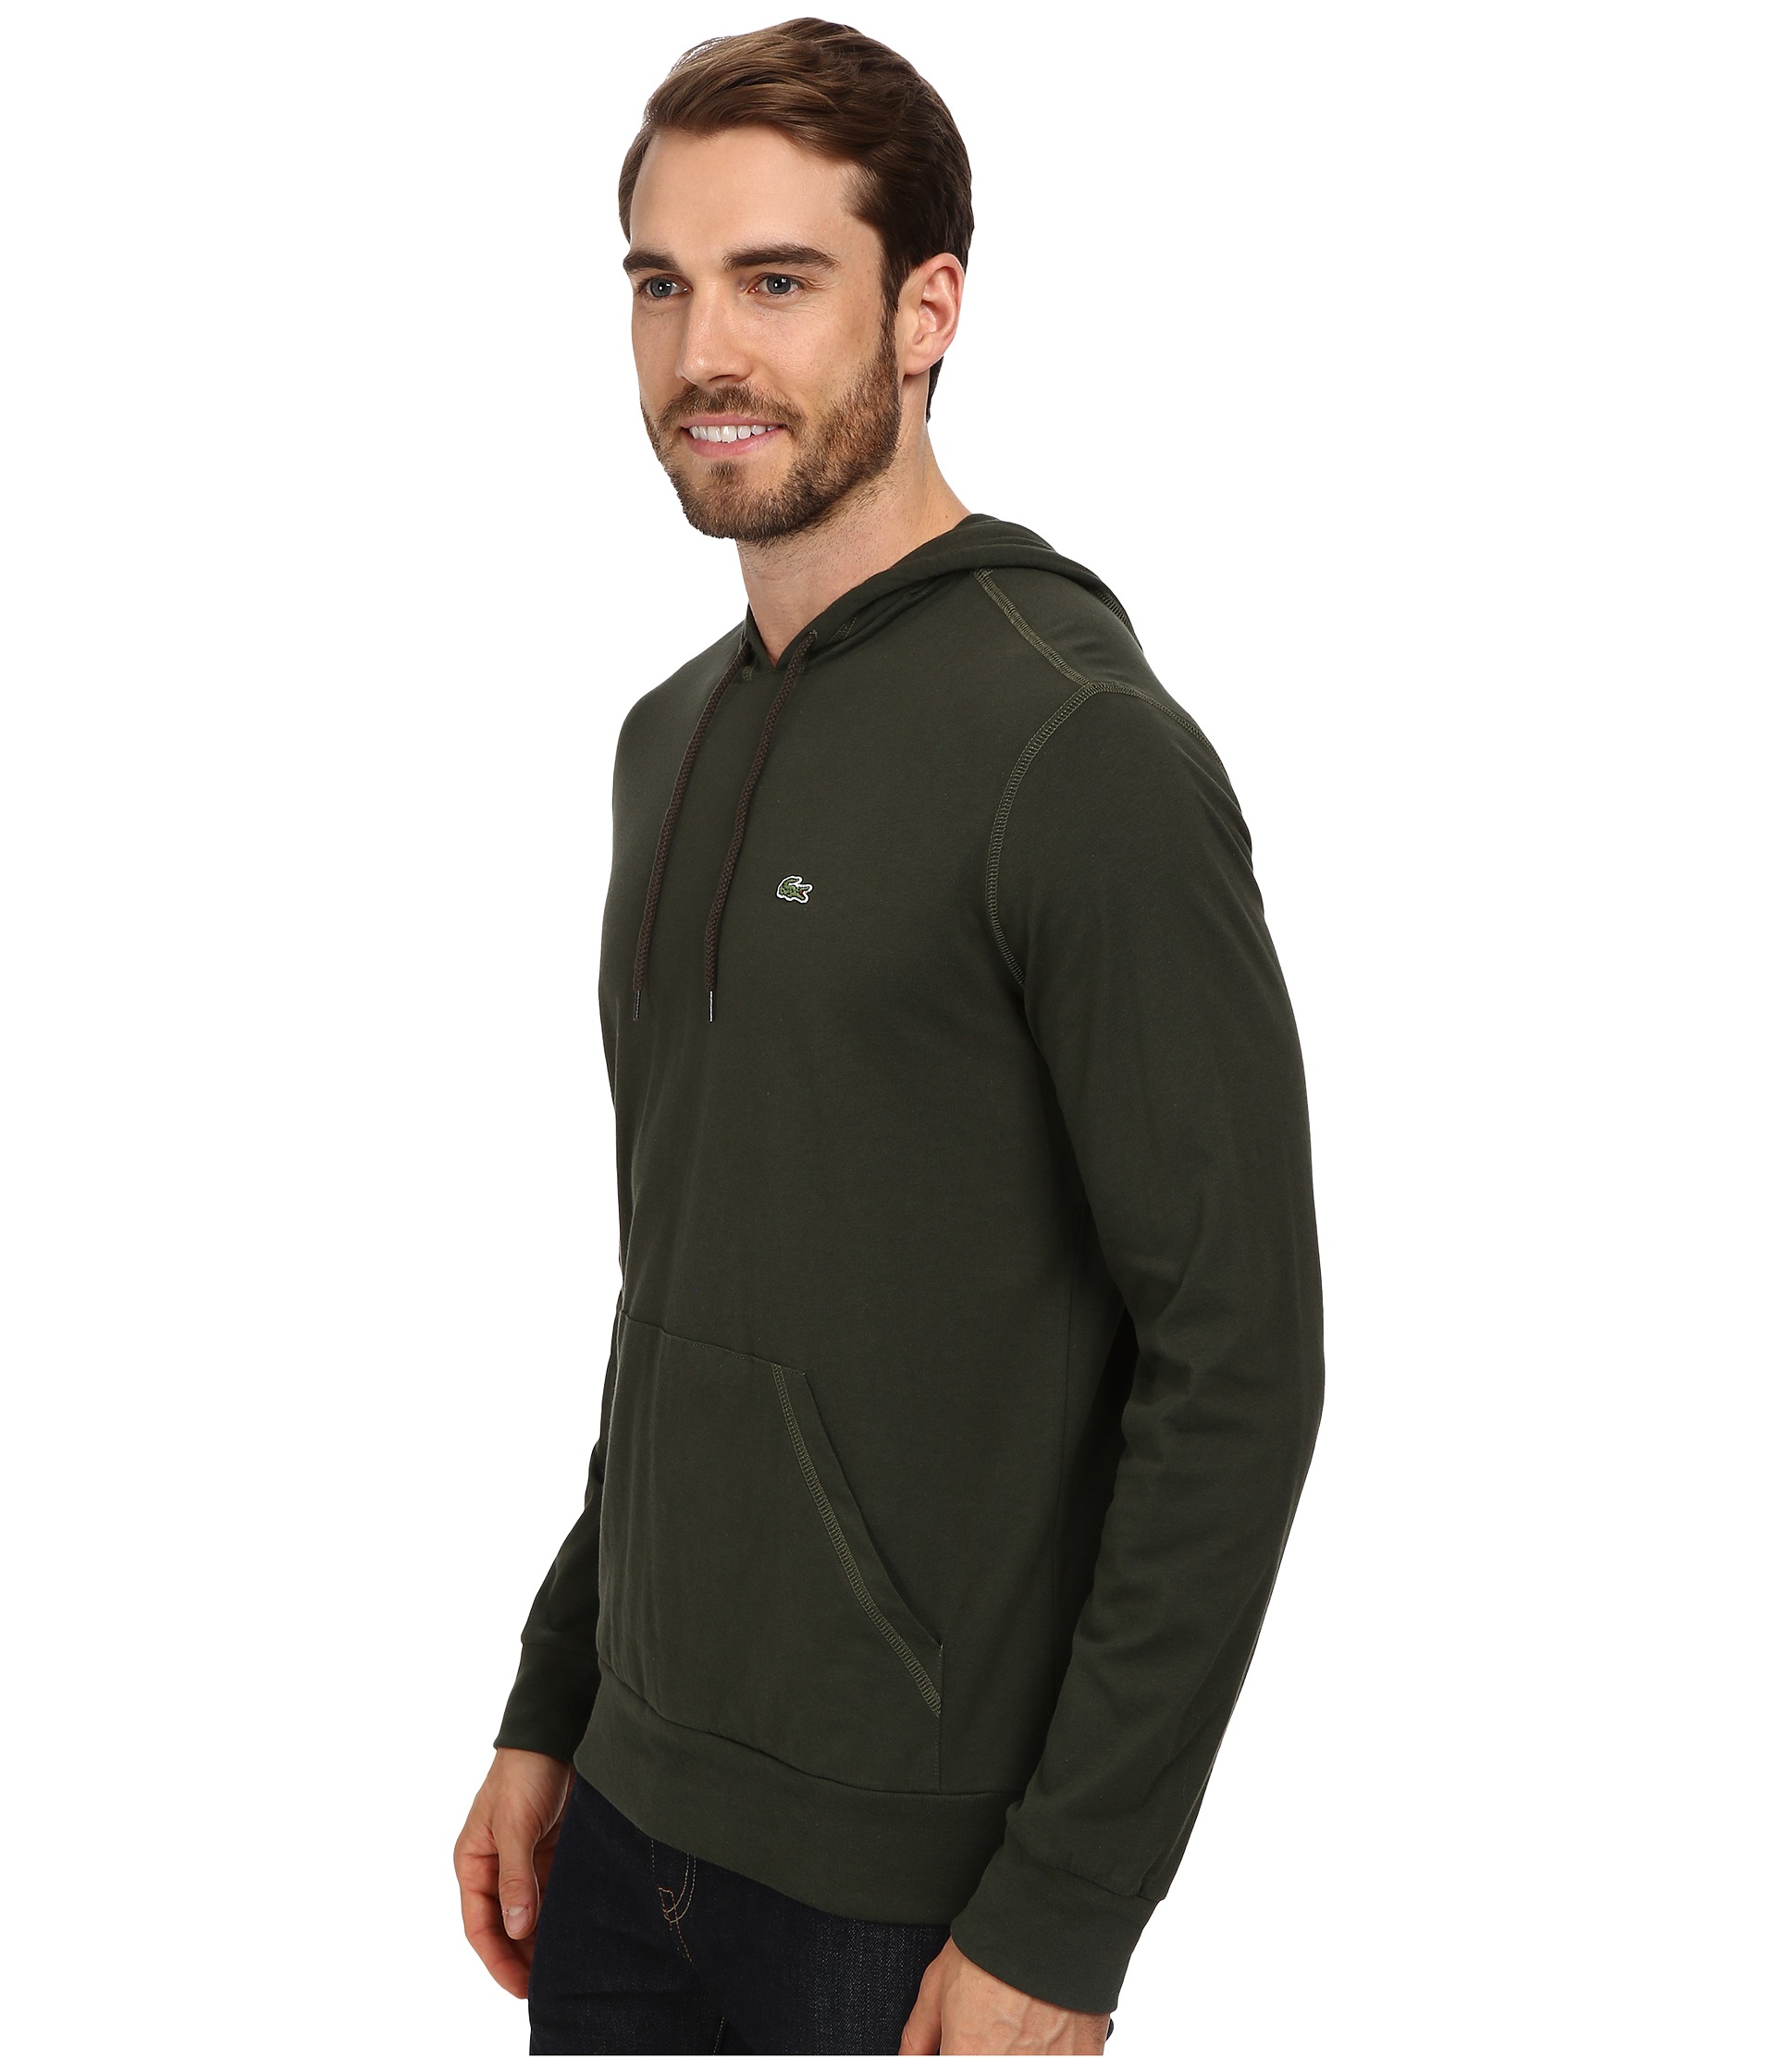 Lacoste Jersey T-Shirt Hoodie - Zappos.com Free Shipping BOTH Ways